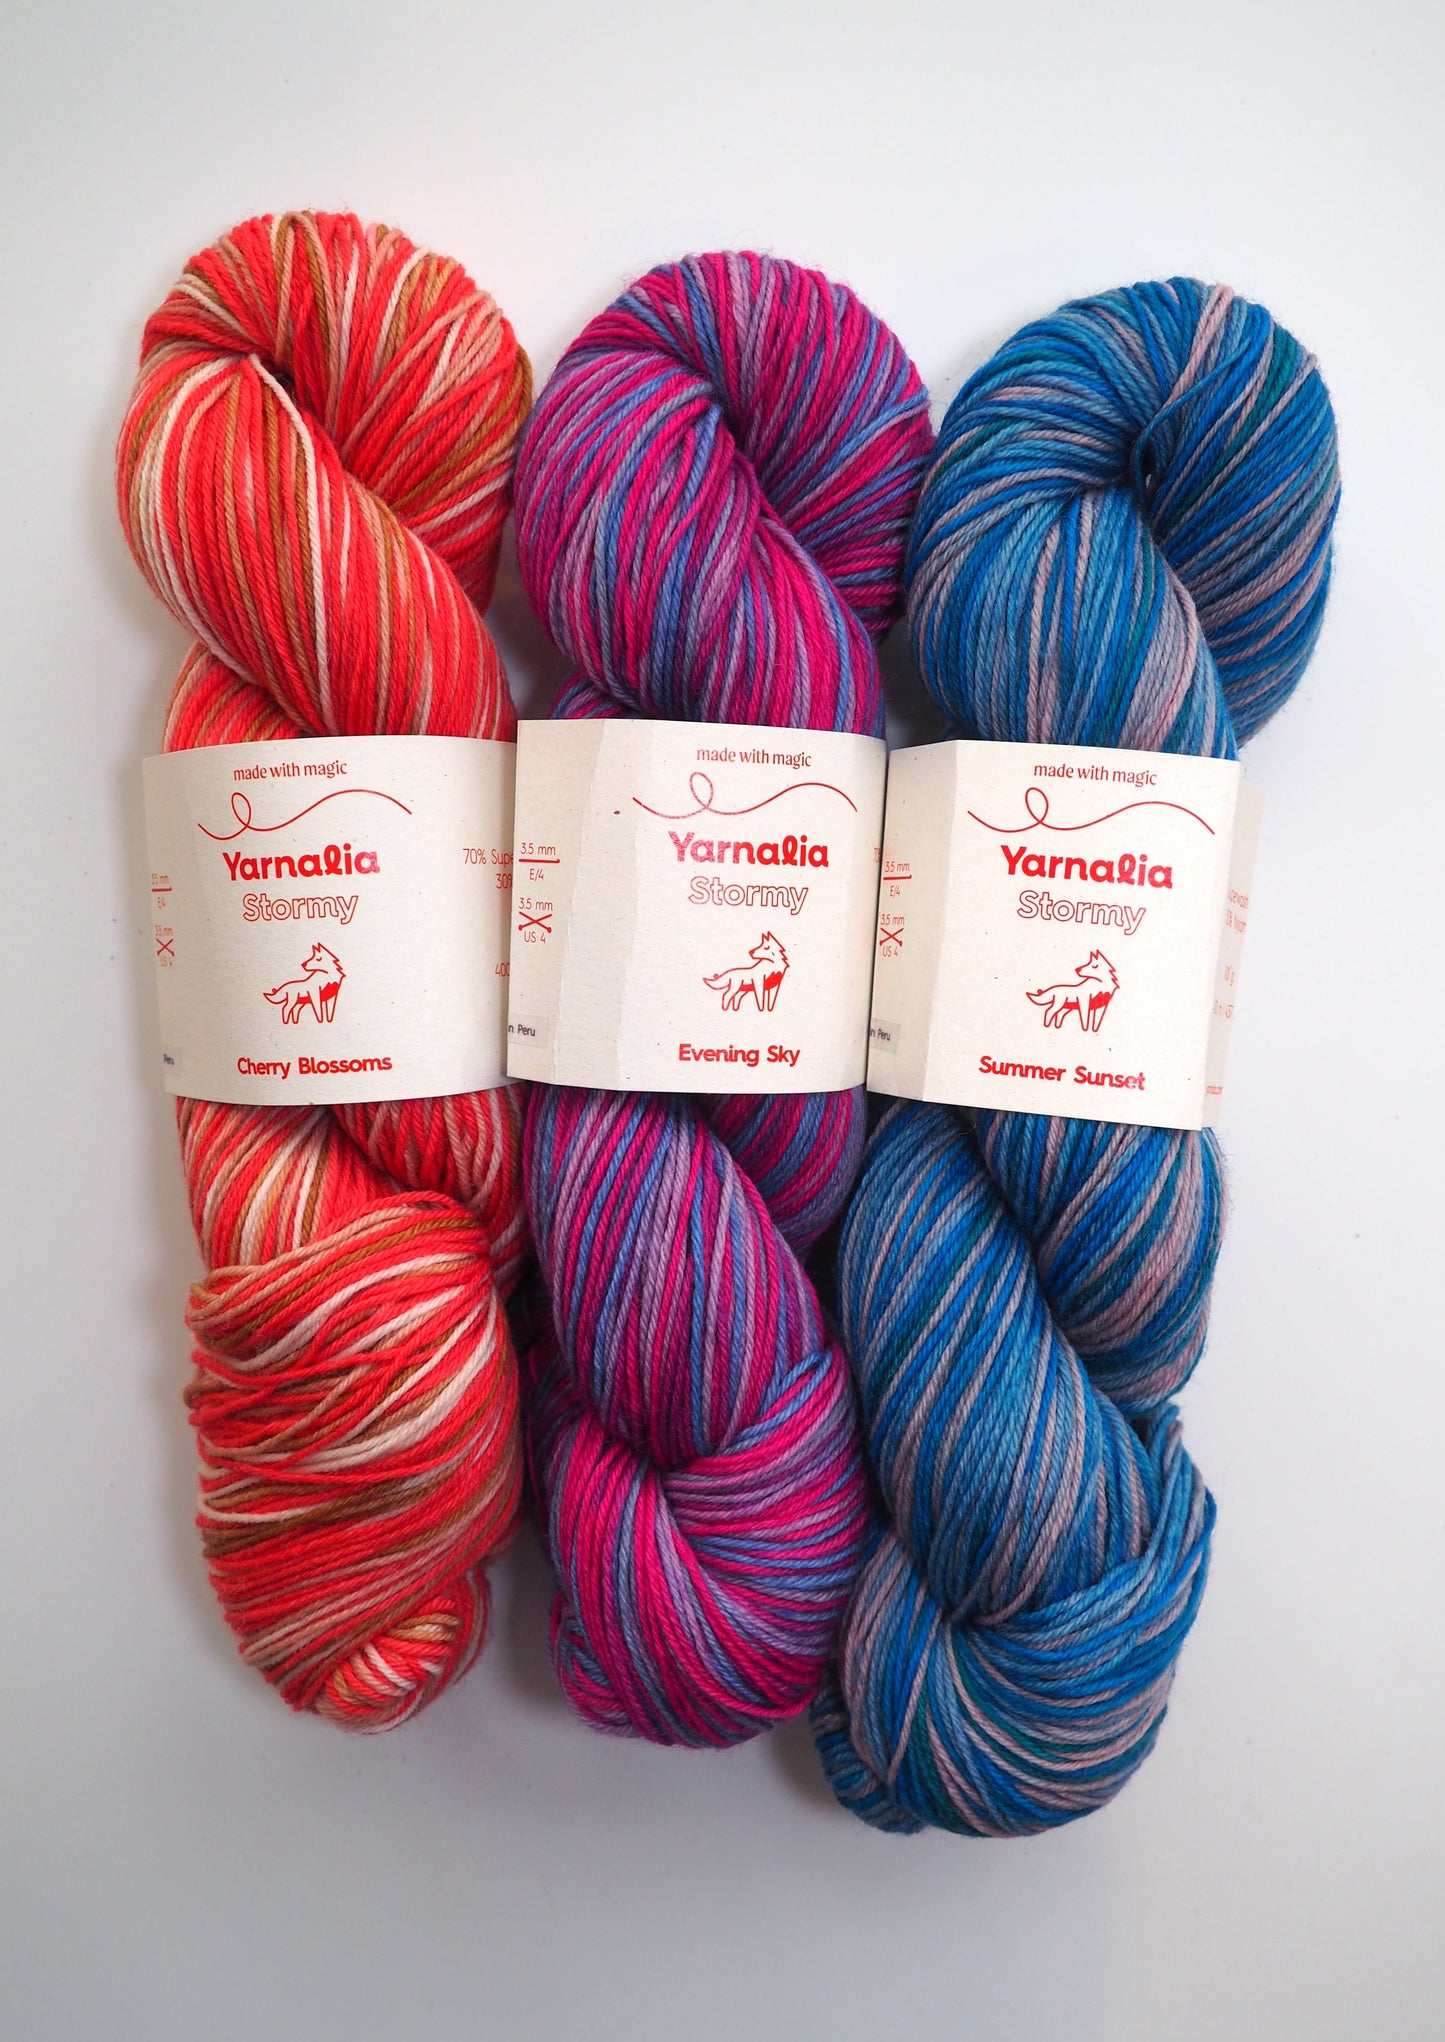 an image of three skeins of Yarnalia Stormy. One red, one pink and blue, and one blue and beige